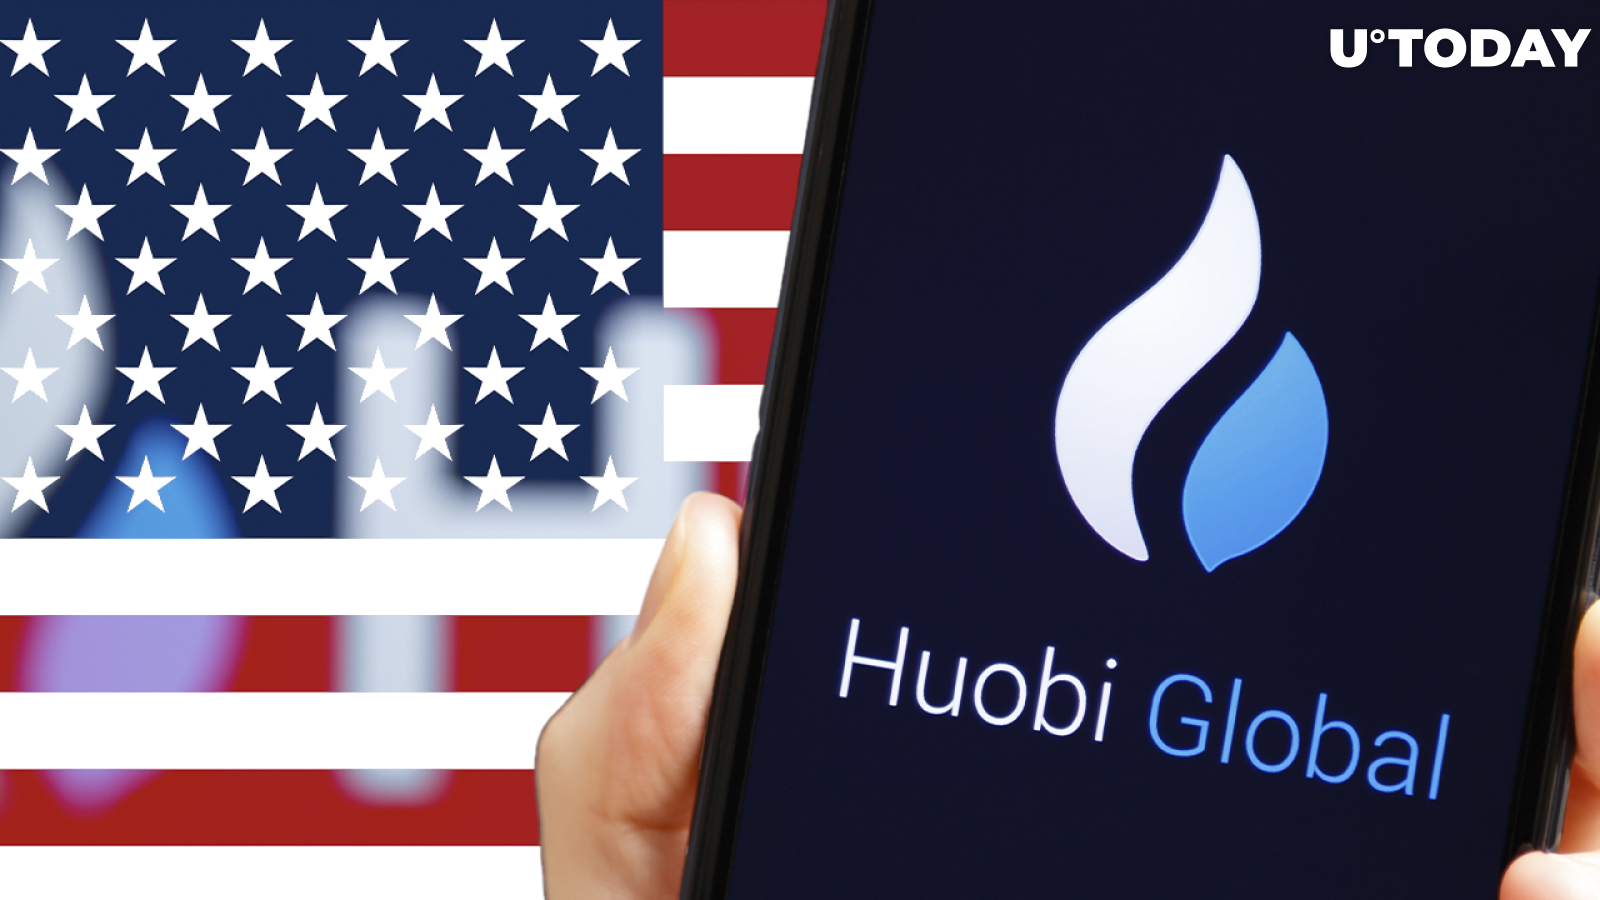 Huobi to Re-Open U.S. Markets After a Two-Year Hiatus, and Here's What It Aims to Do